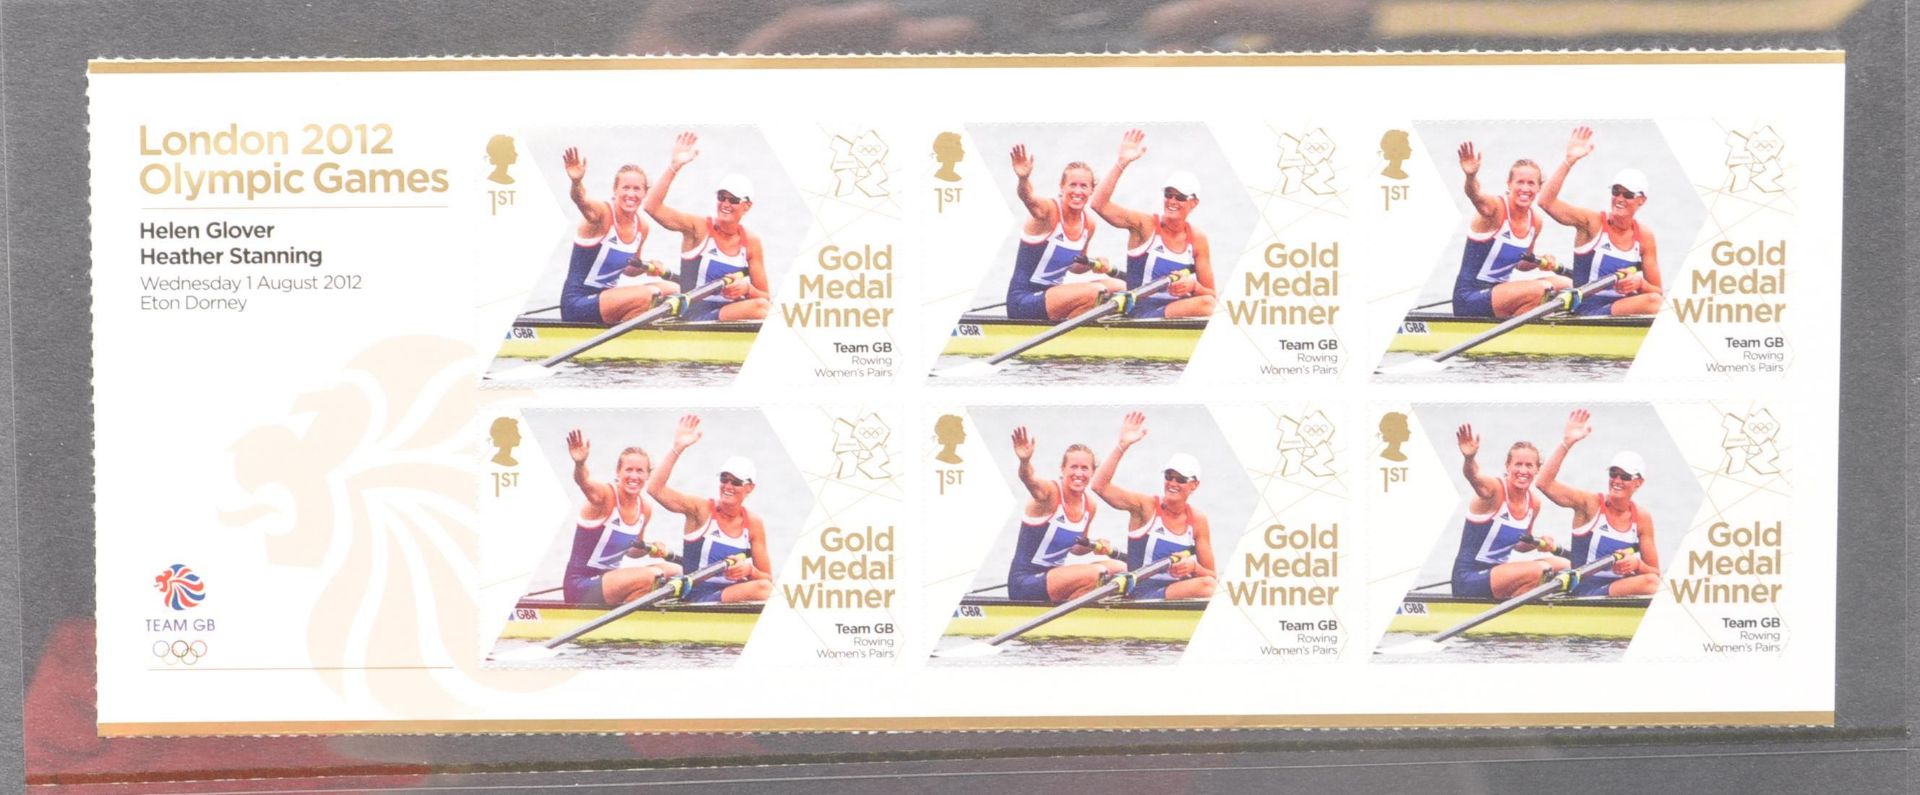 STAMPS - LONDON 2012 TEAM GB GOLD MEDAL WINNERS STAMP COLLECTION - Image 2 of 11